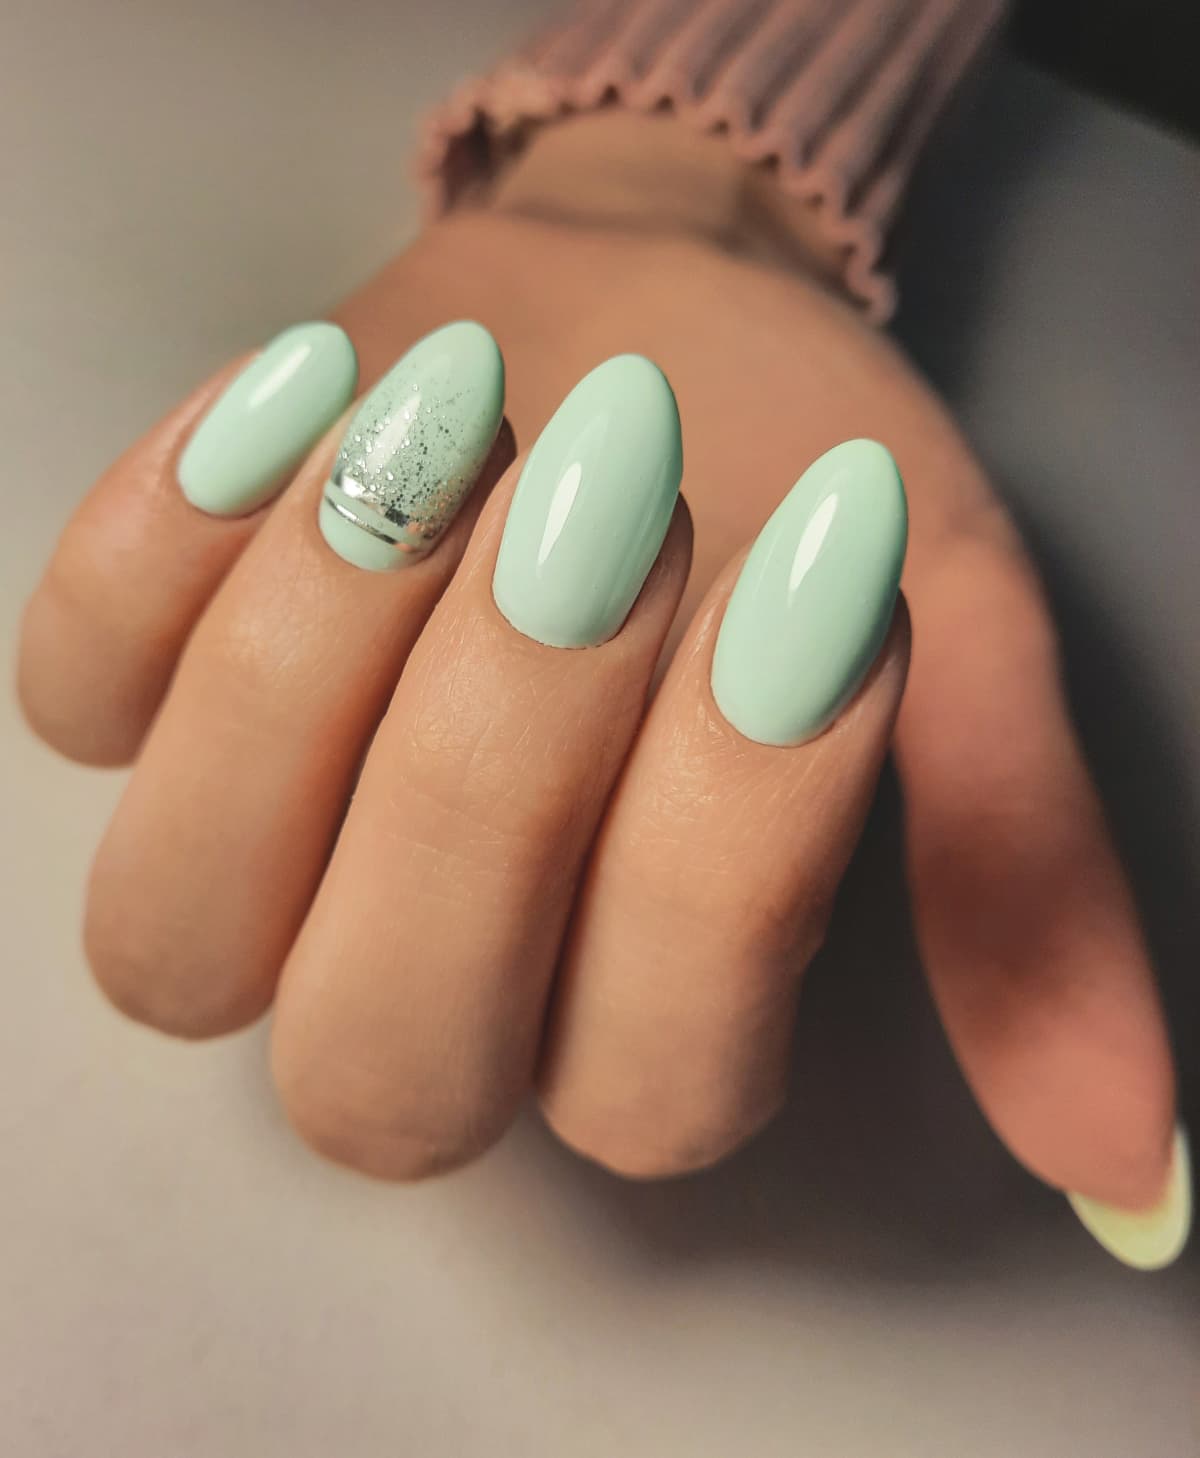 Hand with an almond-shaped manicure and nail art